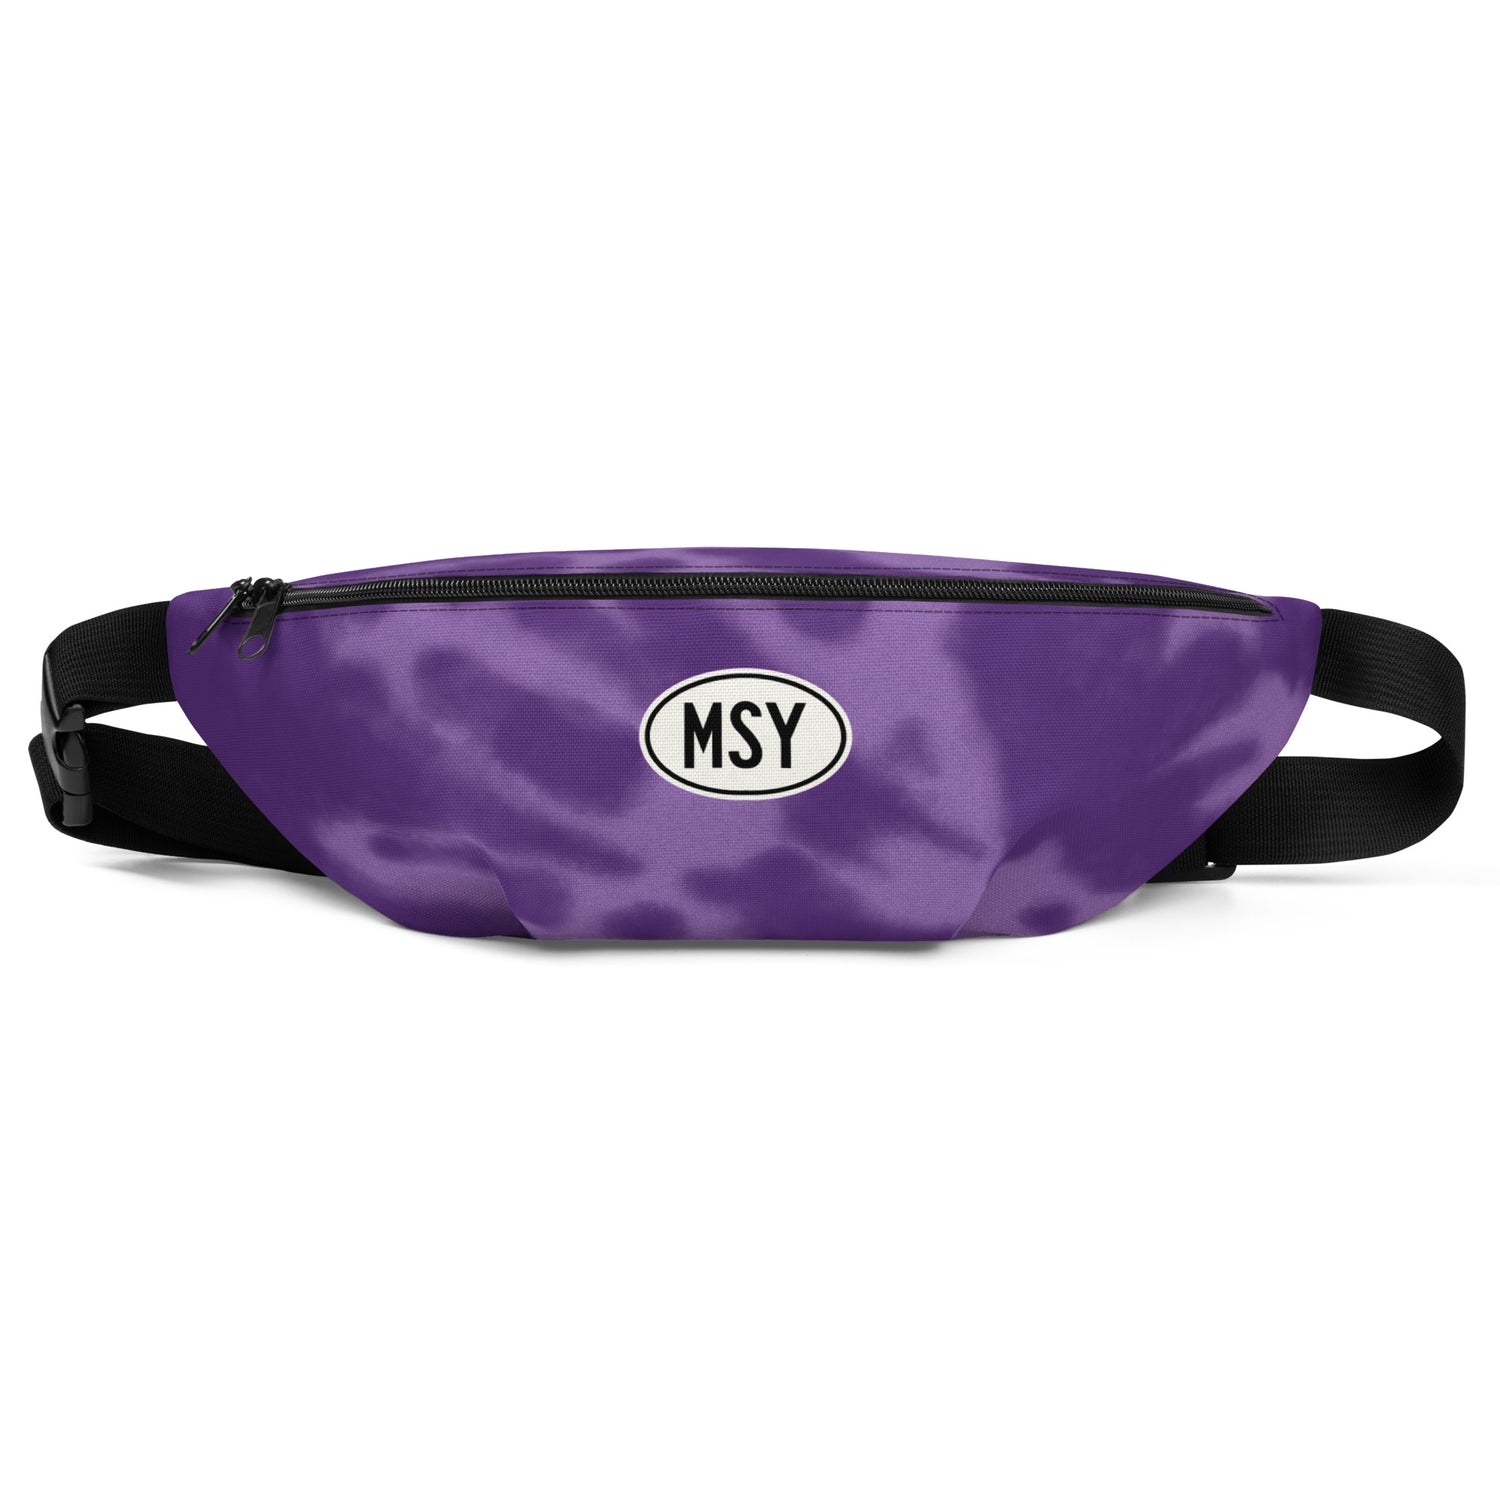 New Orleans Louisiana Backpacks, Fanny Packs and Tote Bags • MSY Airport Code